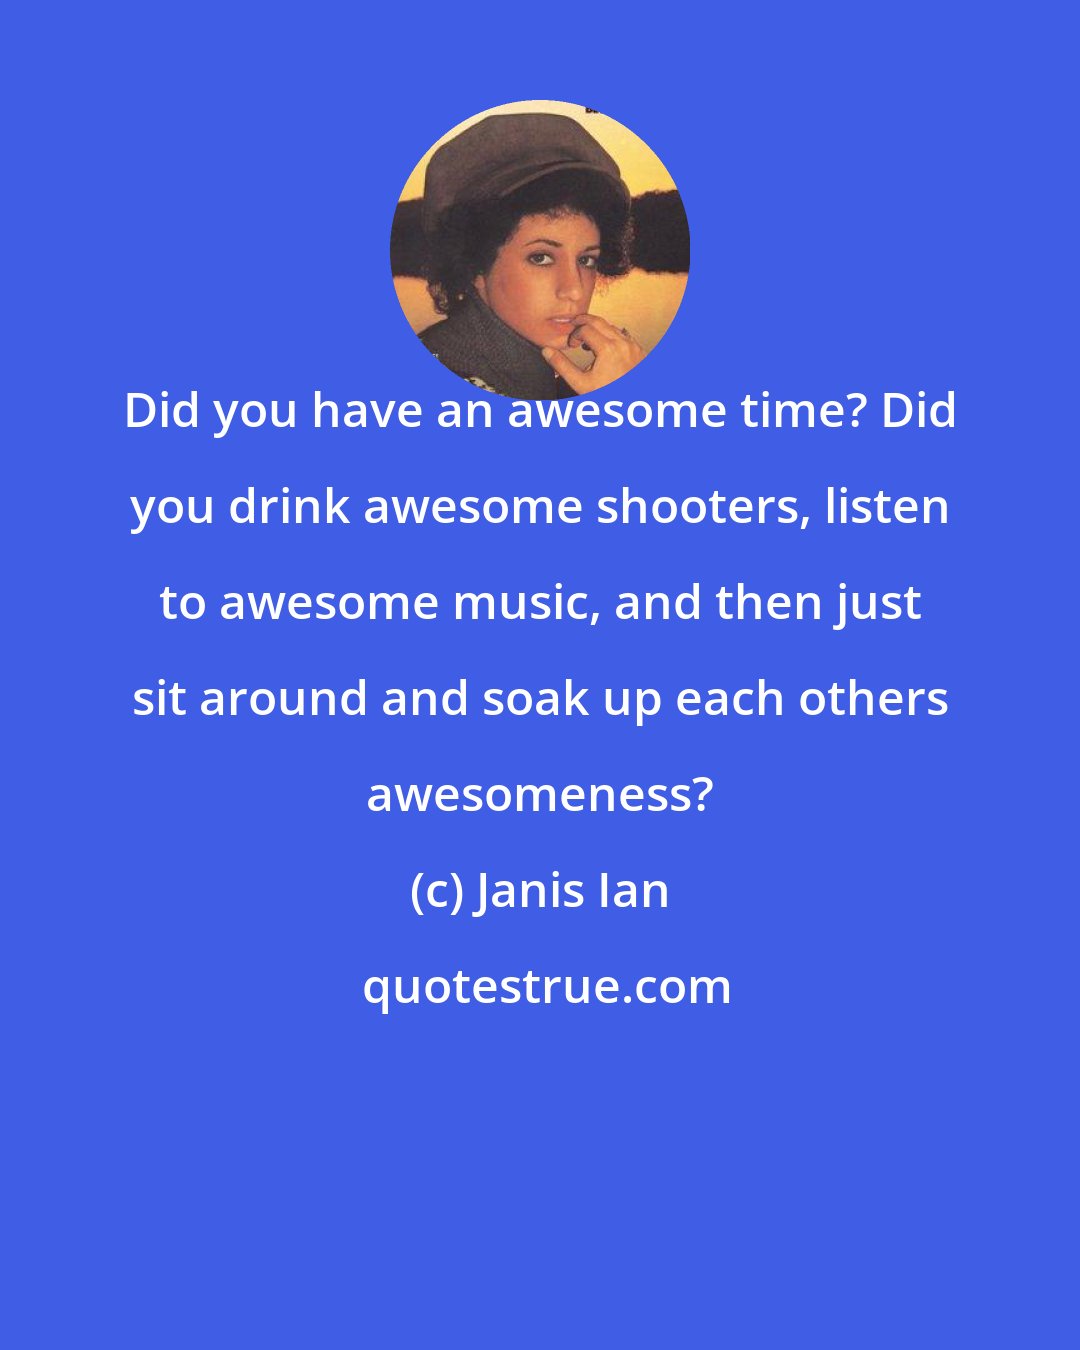 Janis Ian: Did you have an awesome time? Did you drink awesome shooters, listen to awesome music, and then just sit around and soak up each others awesomeness?